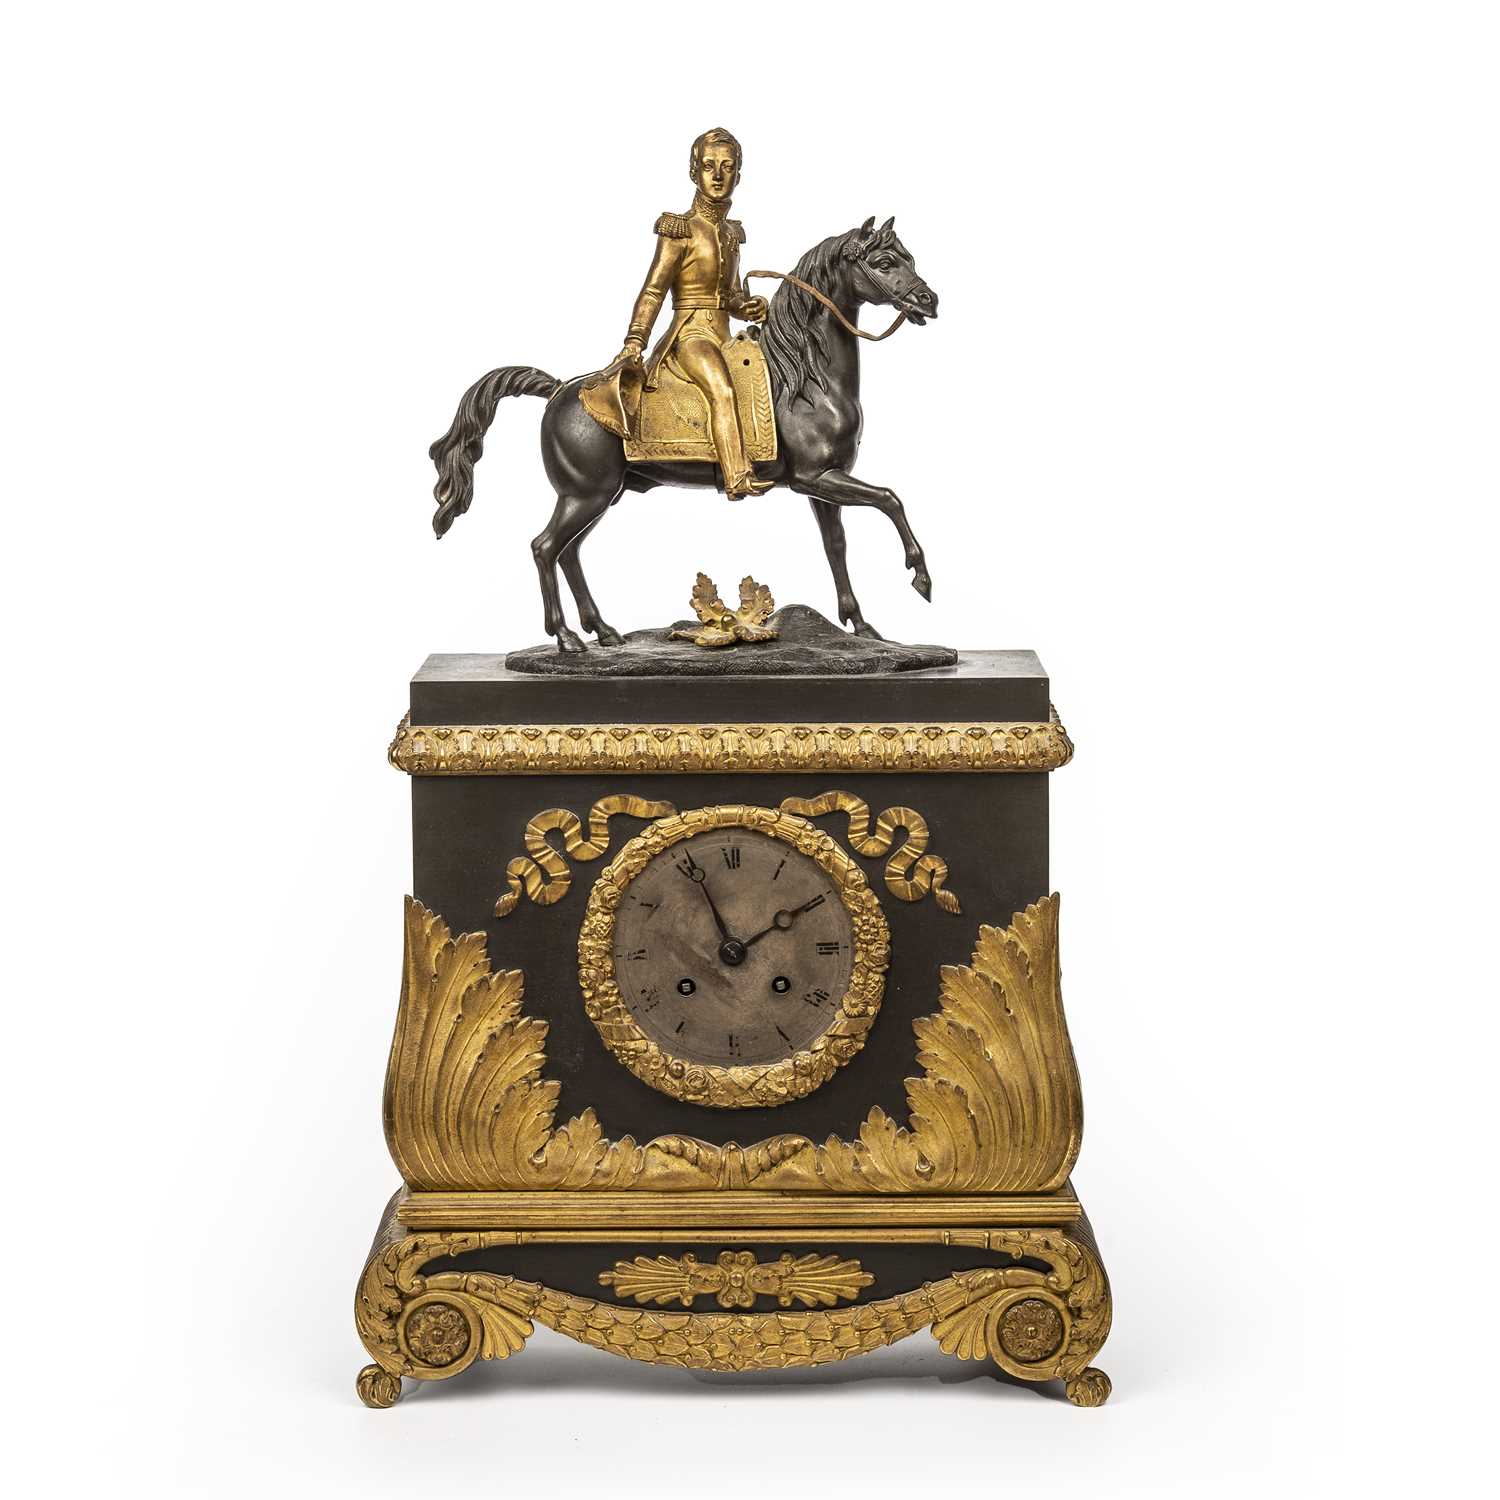 A 19th century French mantel clock with silvered Roman dial, drum movement with silk suspension